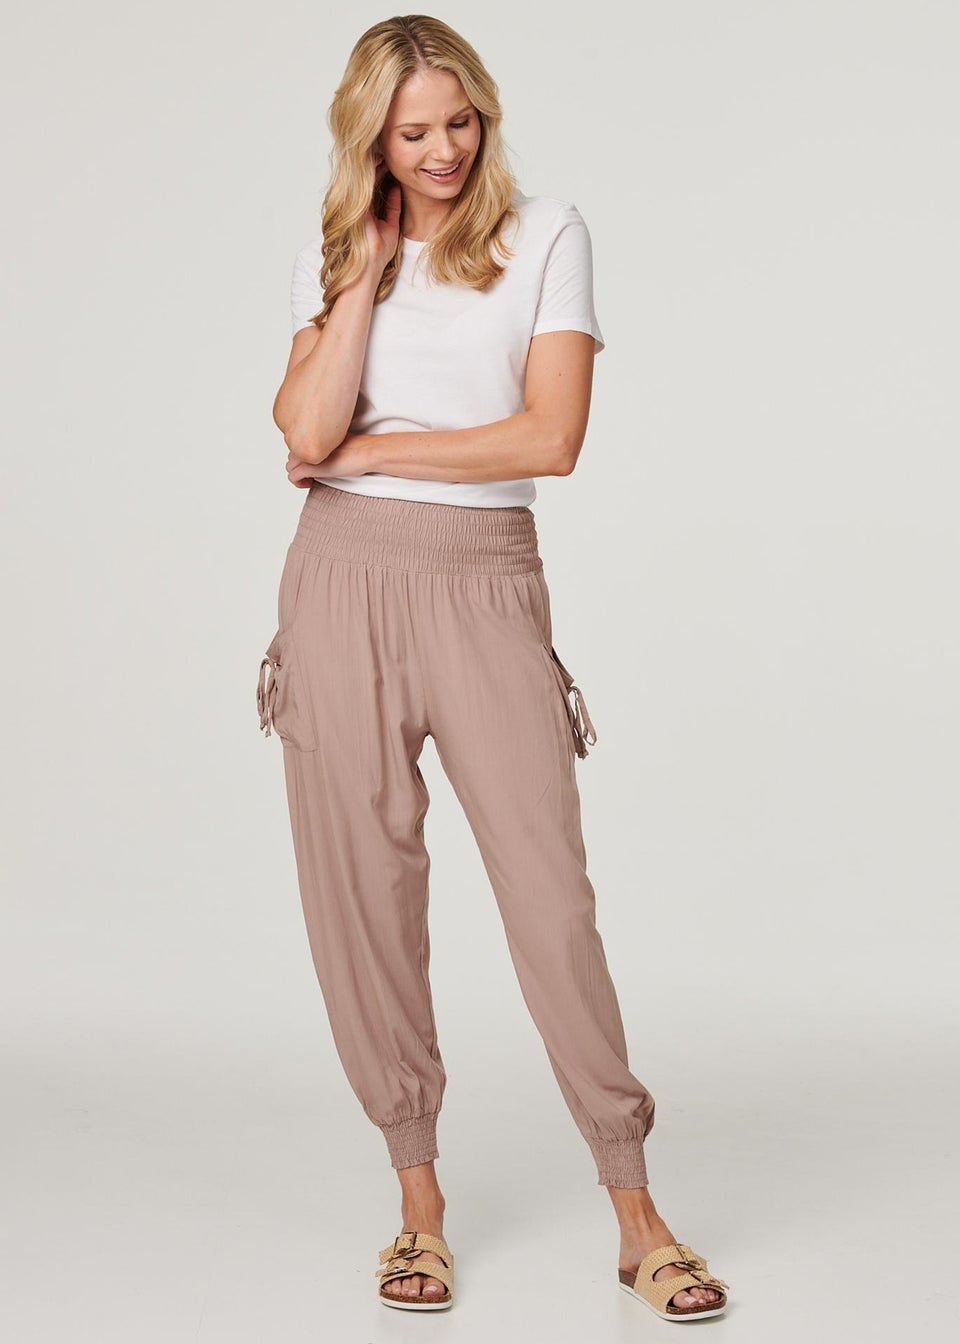 Izabel London Brown High Waist Pull On Tapered Pants